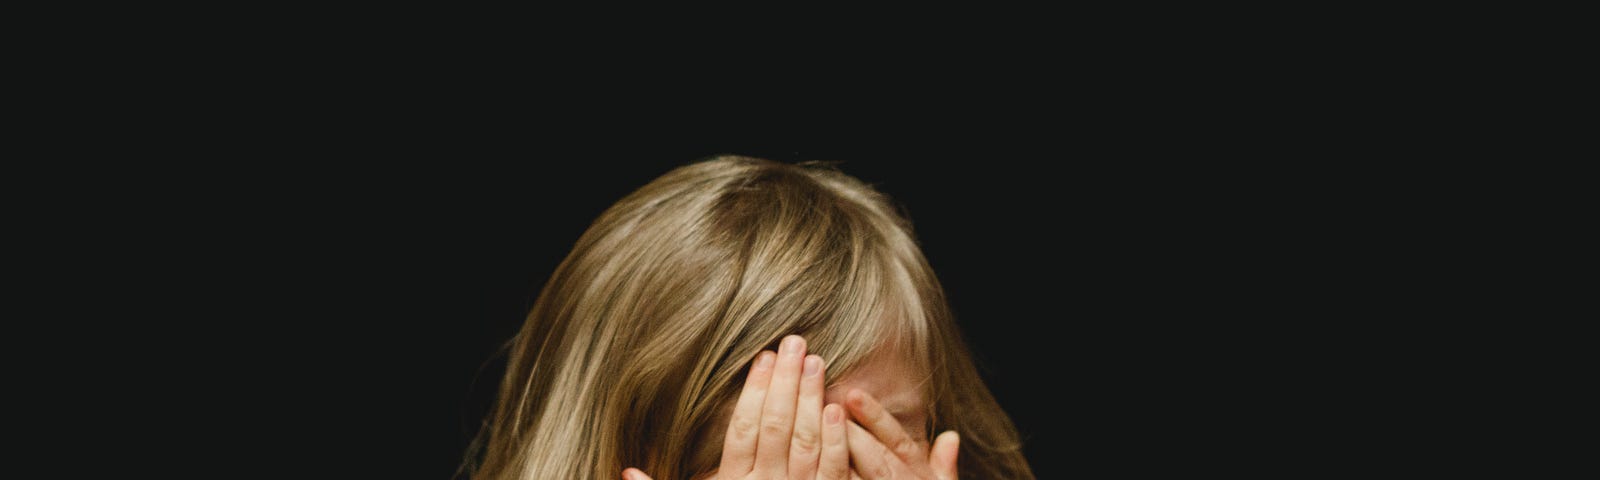 A young girl hiding her face behind her hands as if ashamed.